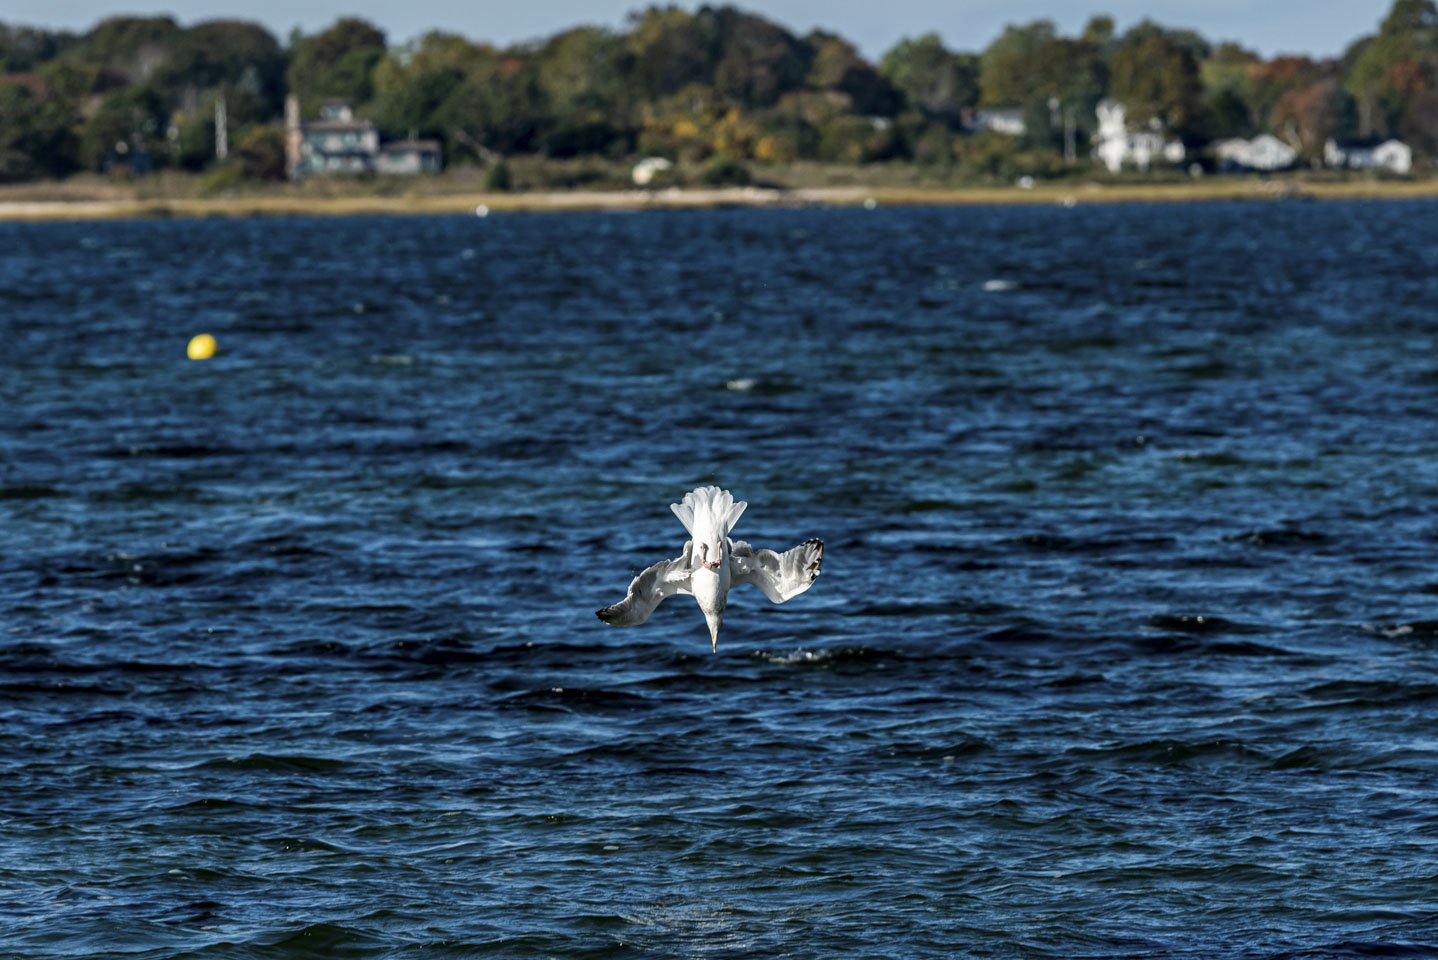 Gull diving directly down into the water